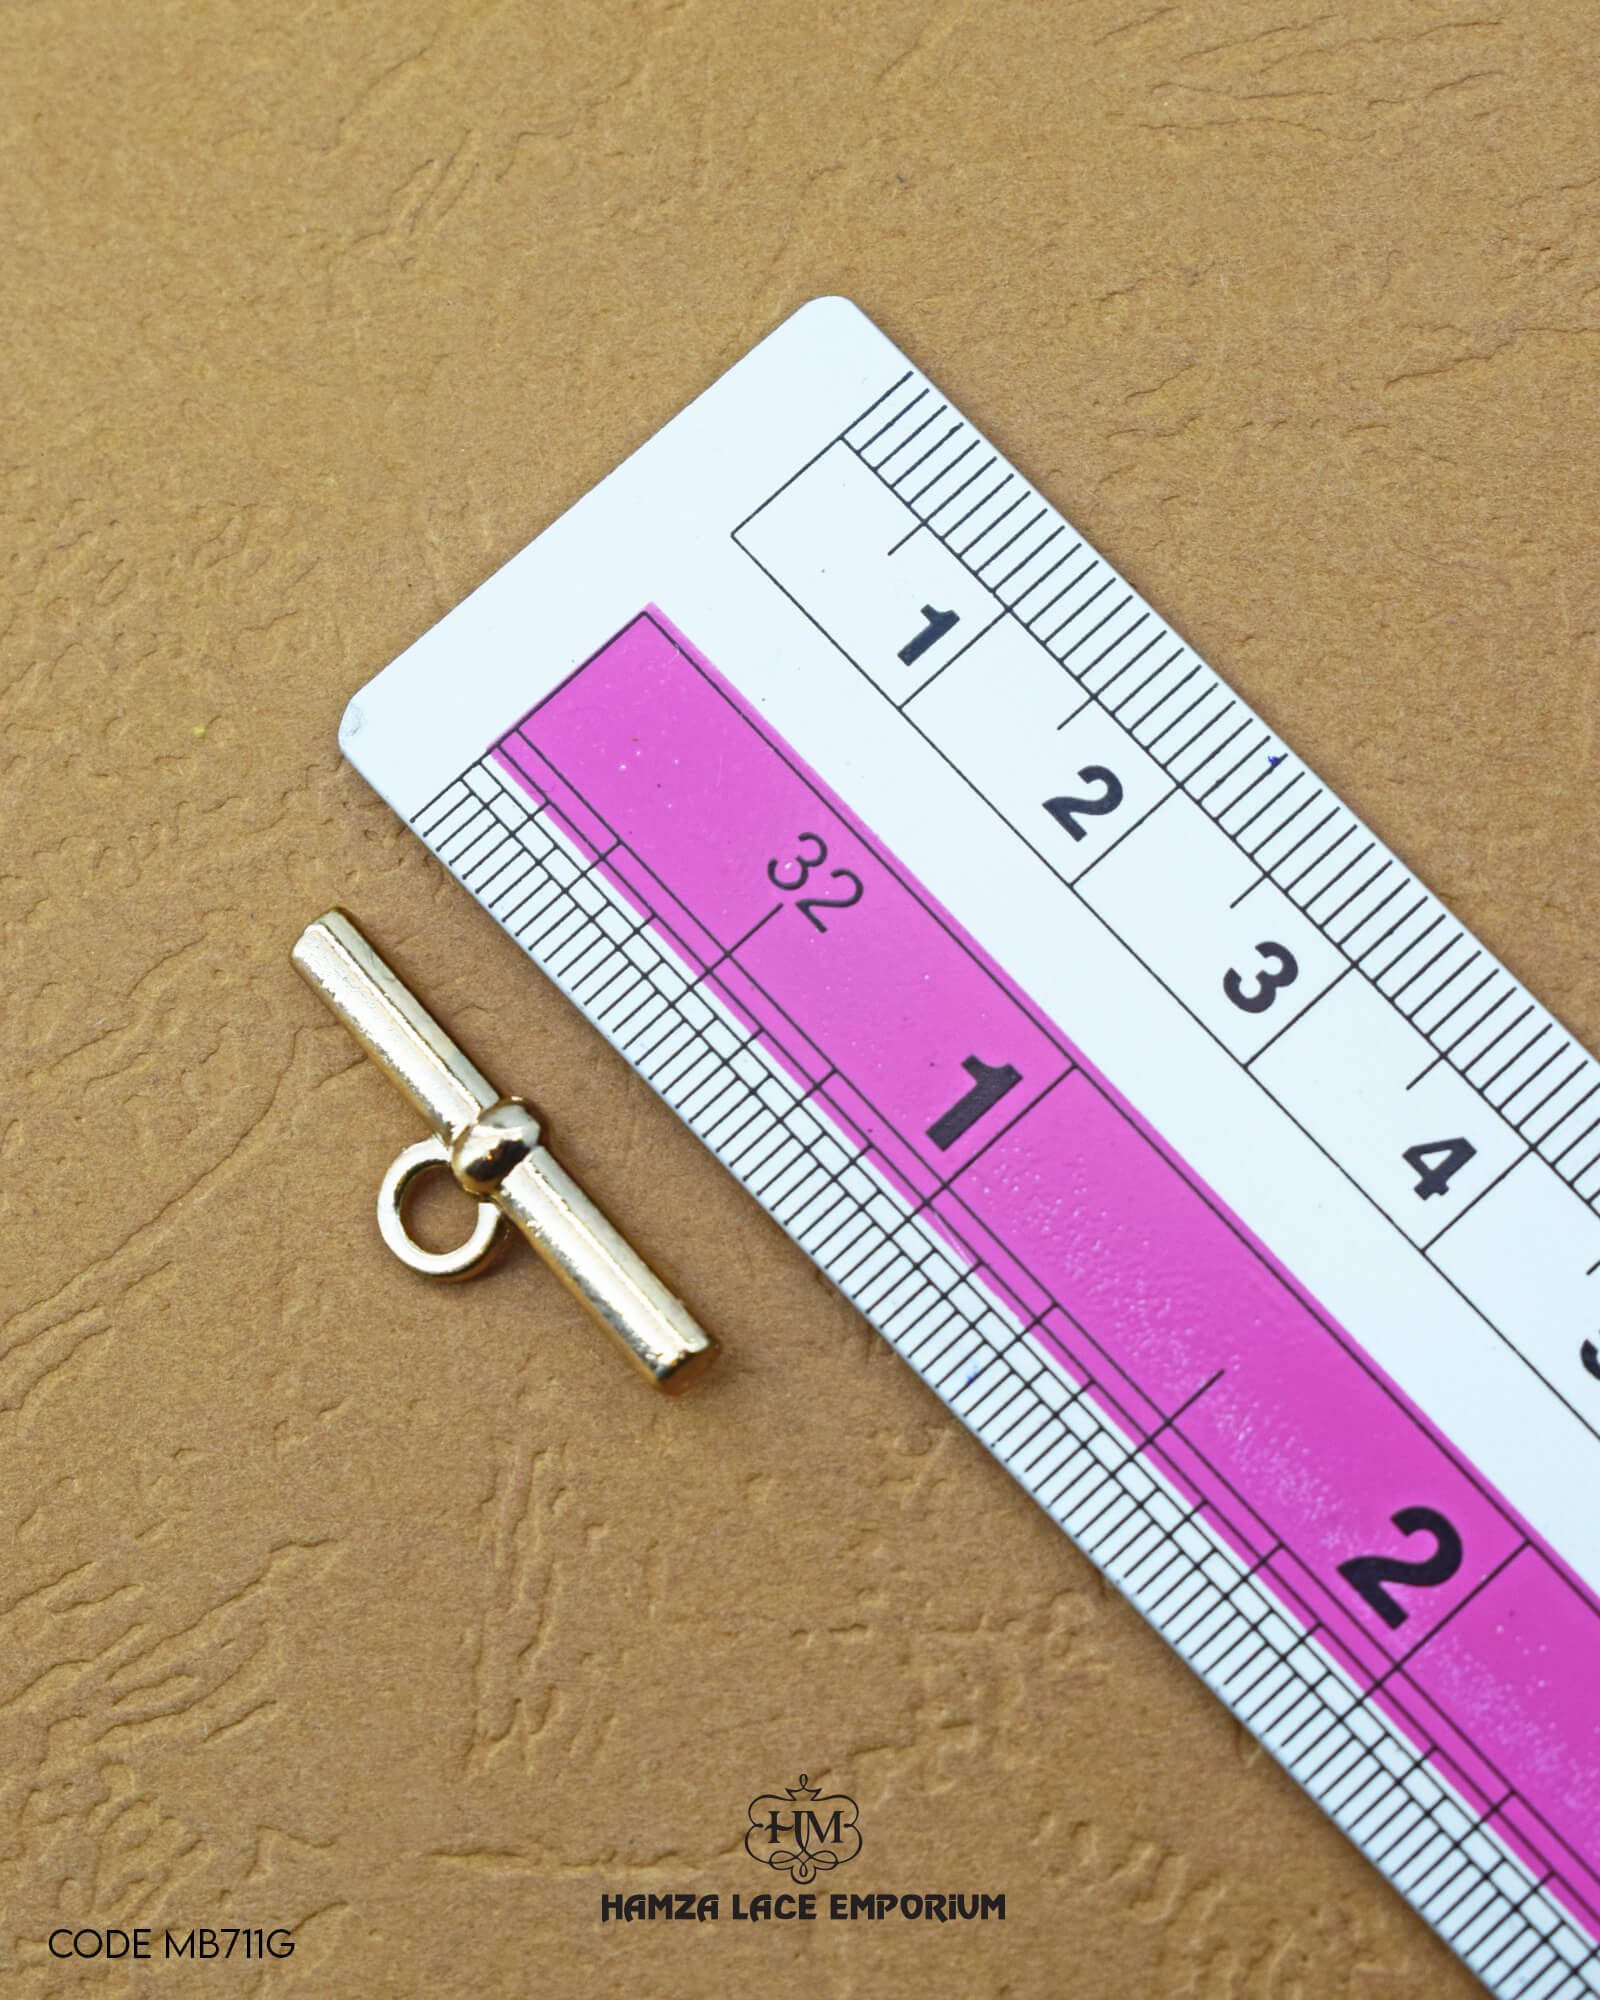 Size of the 'Metal Hanging MB711' is given with the help of a ruler